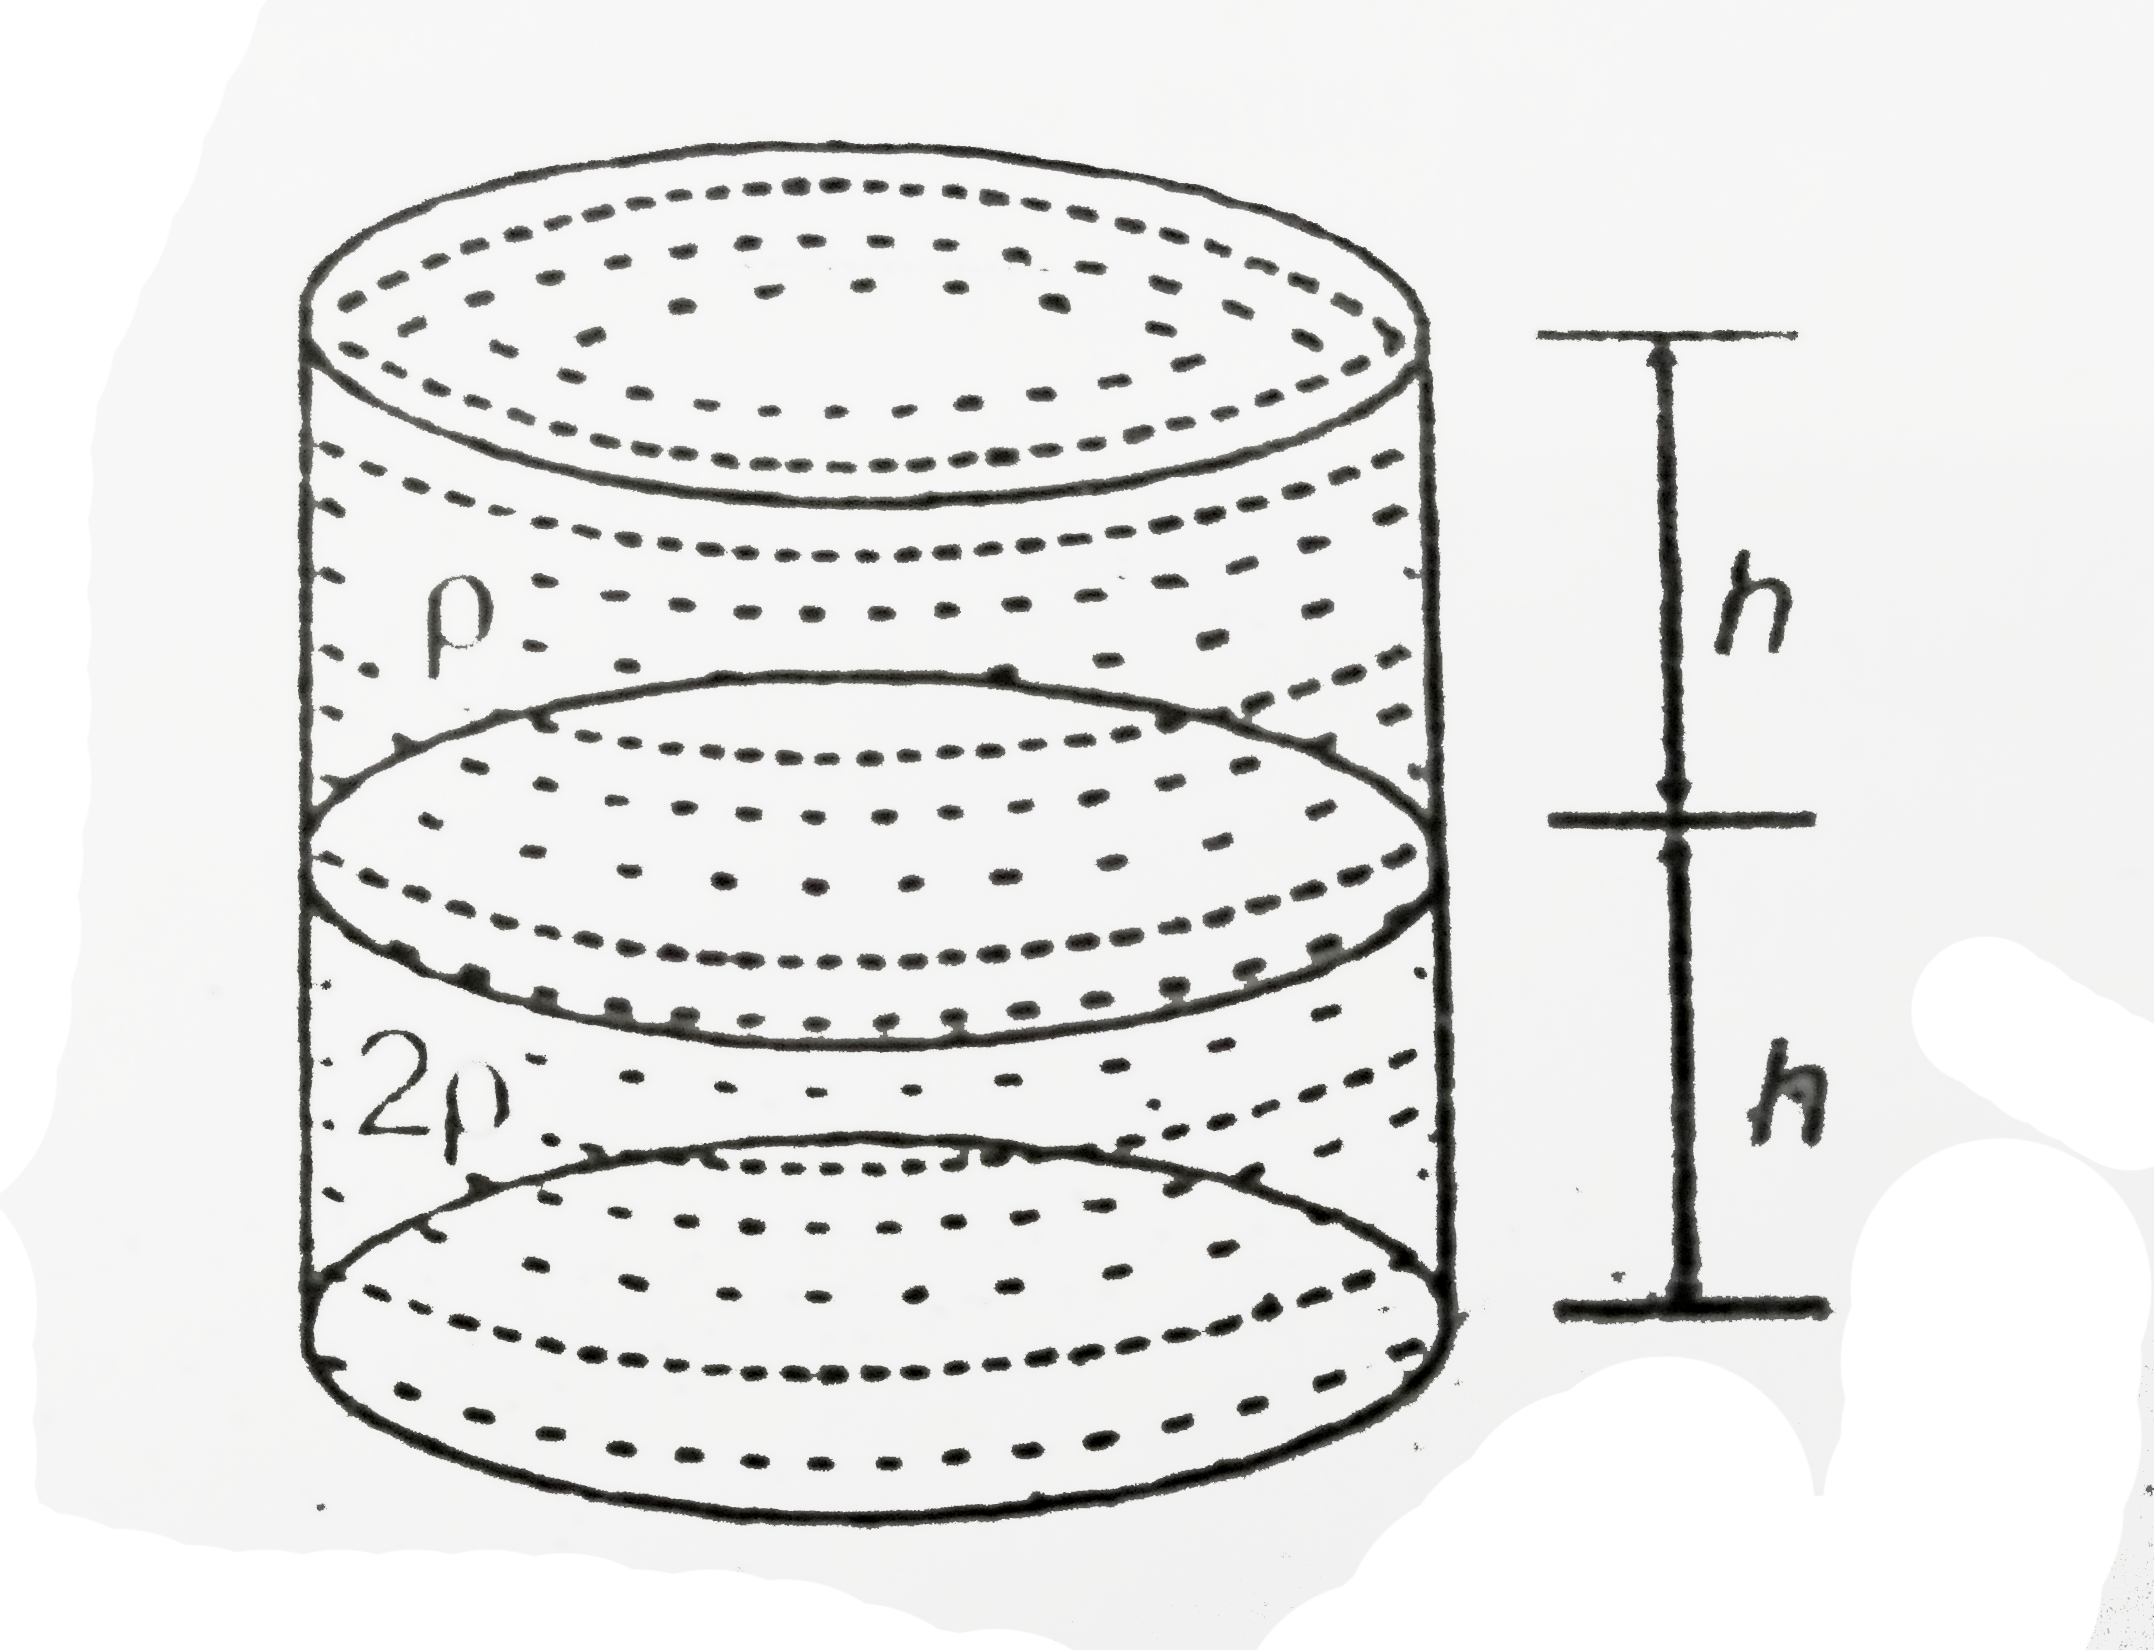 A container of cross-section area A resting on a horizontal surface, holds two immiscible and incompressible liquid of densities rho and 2 rho as shown in figure. The lower density liquid is open to the atmosphere having pressure P(0). The pressure at the bottom of the container is